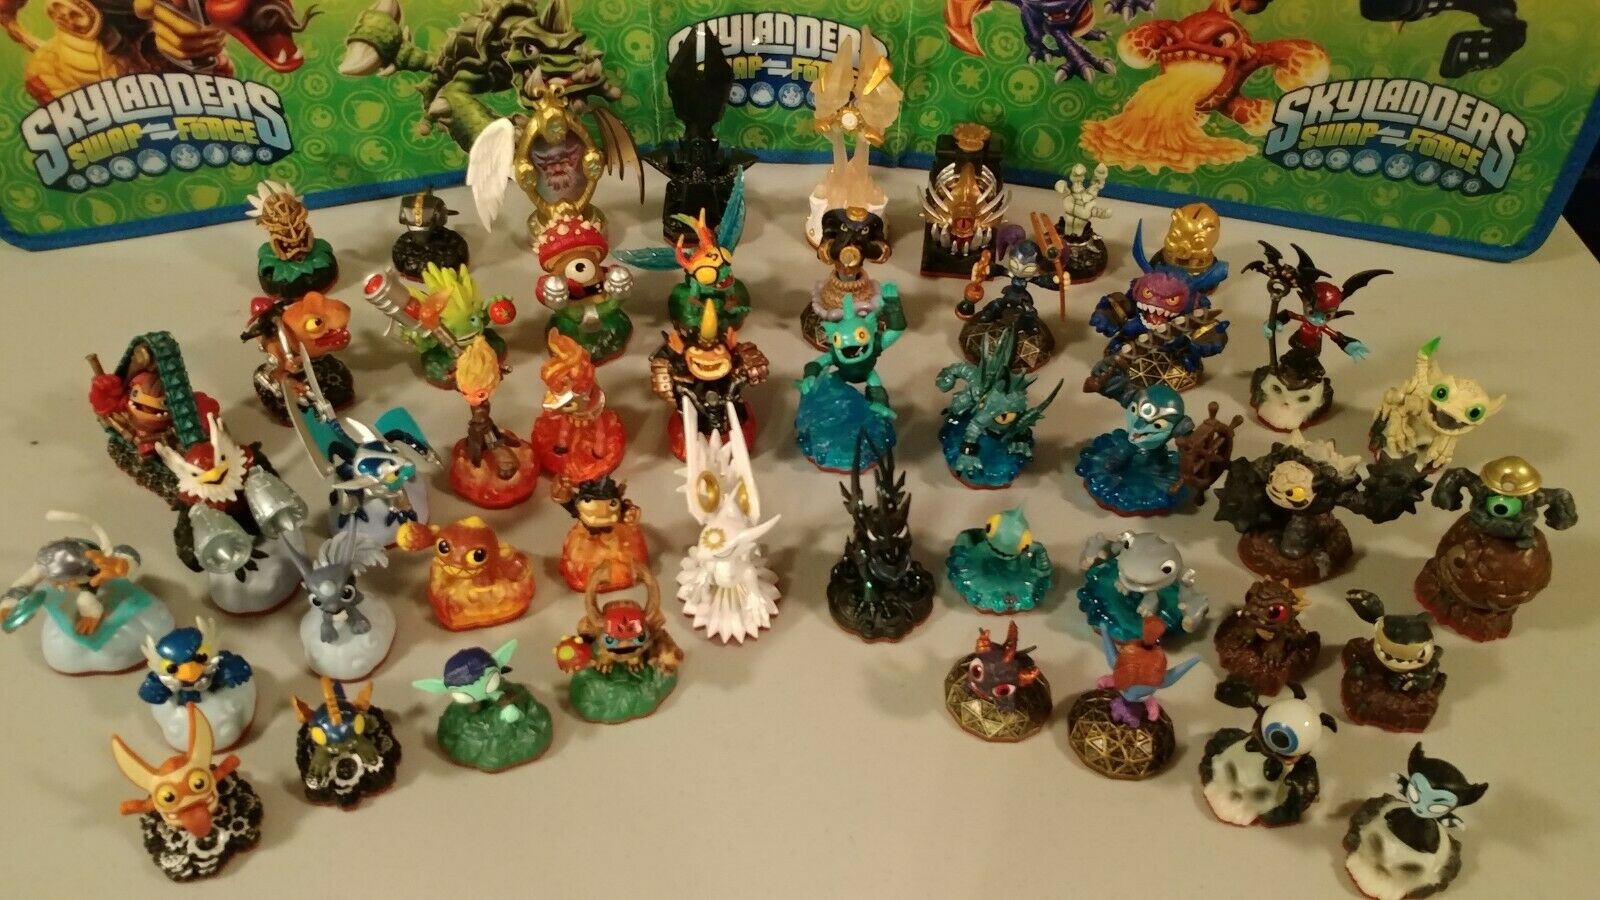 Skylanders Trap Team Complete Your Collection Buy 4 Get One Free! *$6 Minimum*🎼